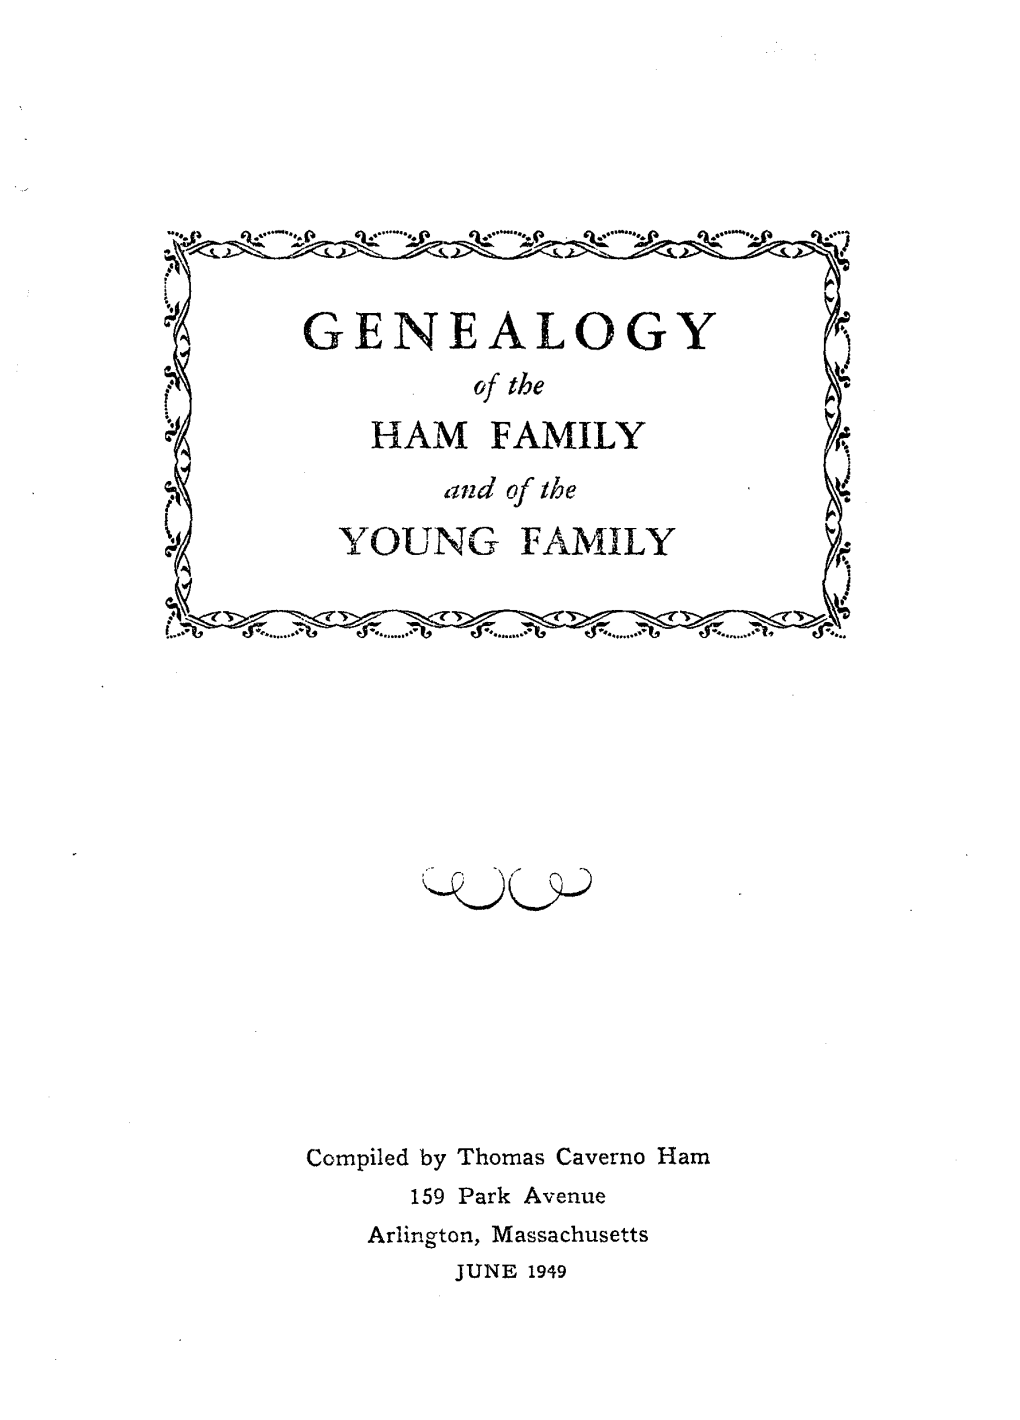 GENEALOGY of the HAM FAMILY ,Uzd of the YOUNG FAIVIILY